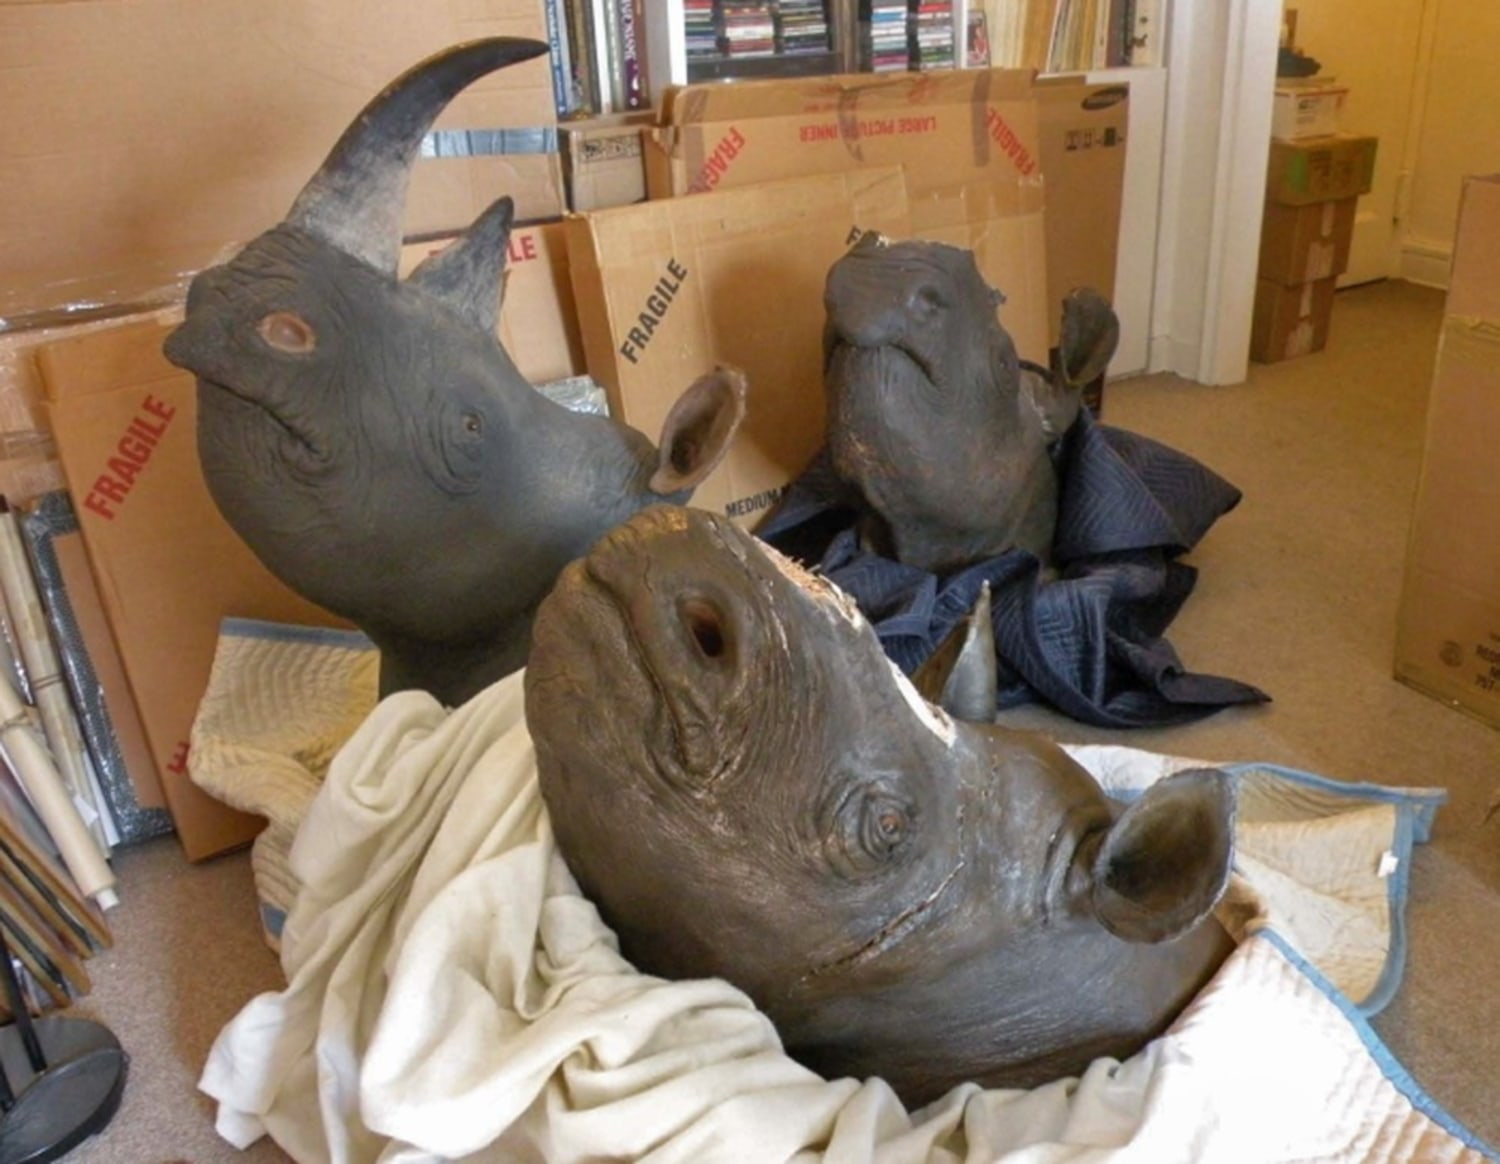 Antiques dealer double-crossed investigators to get valuable rhino horns